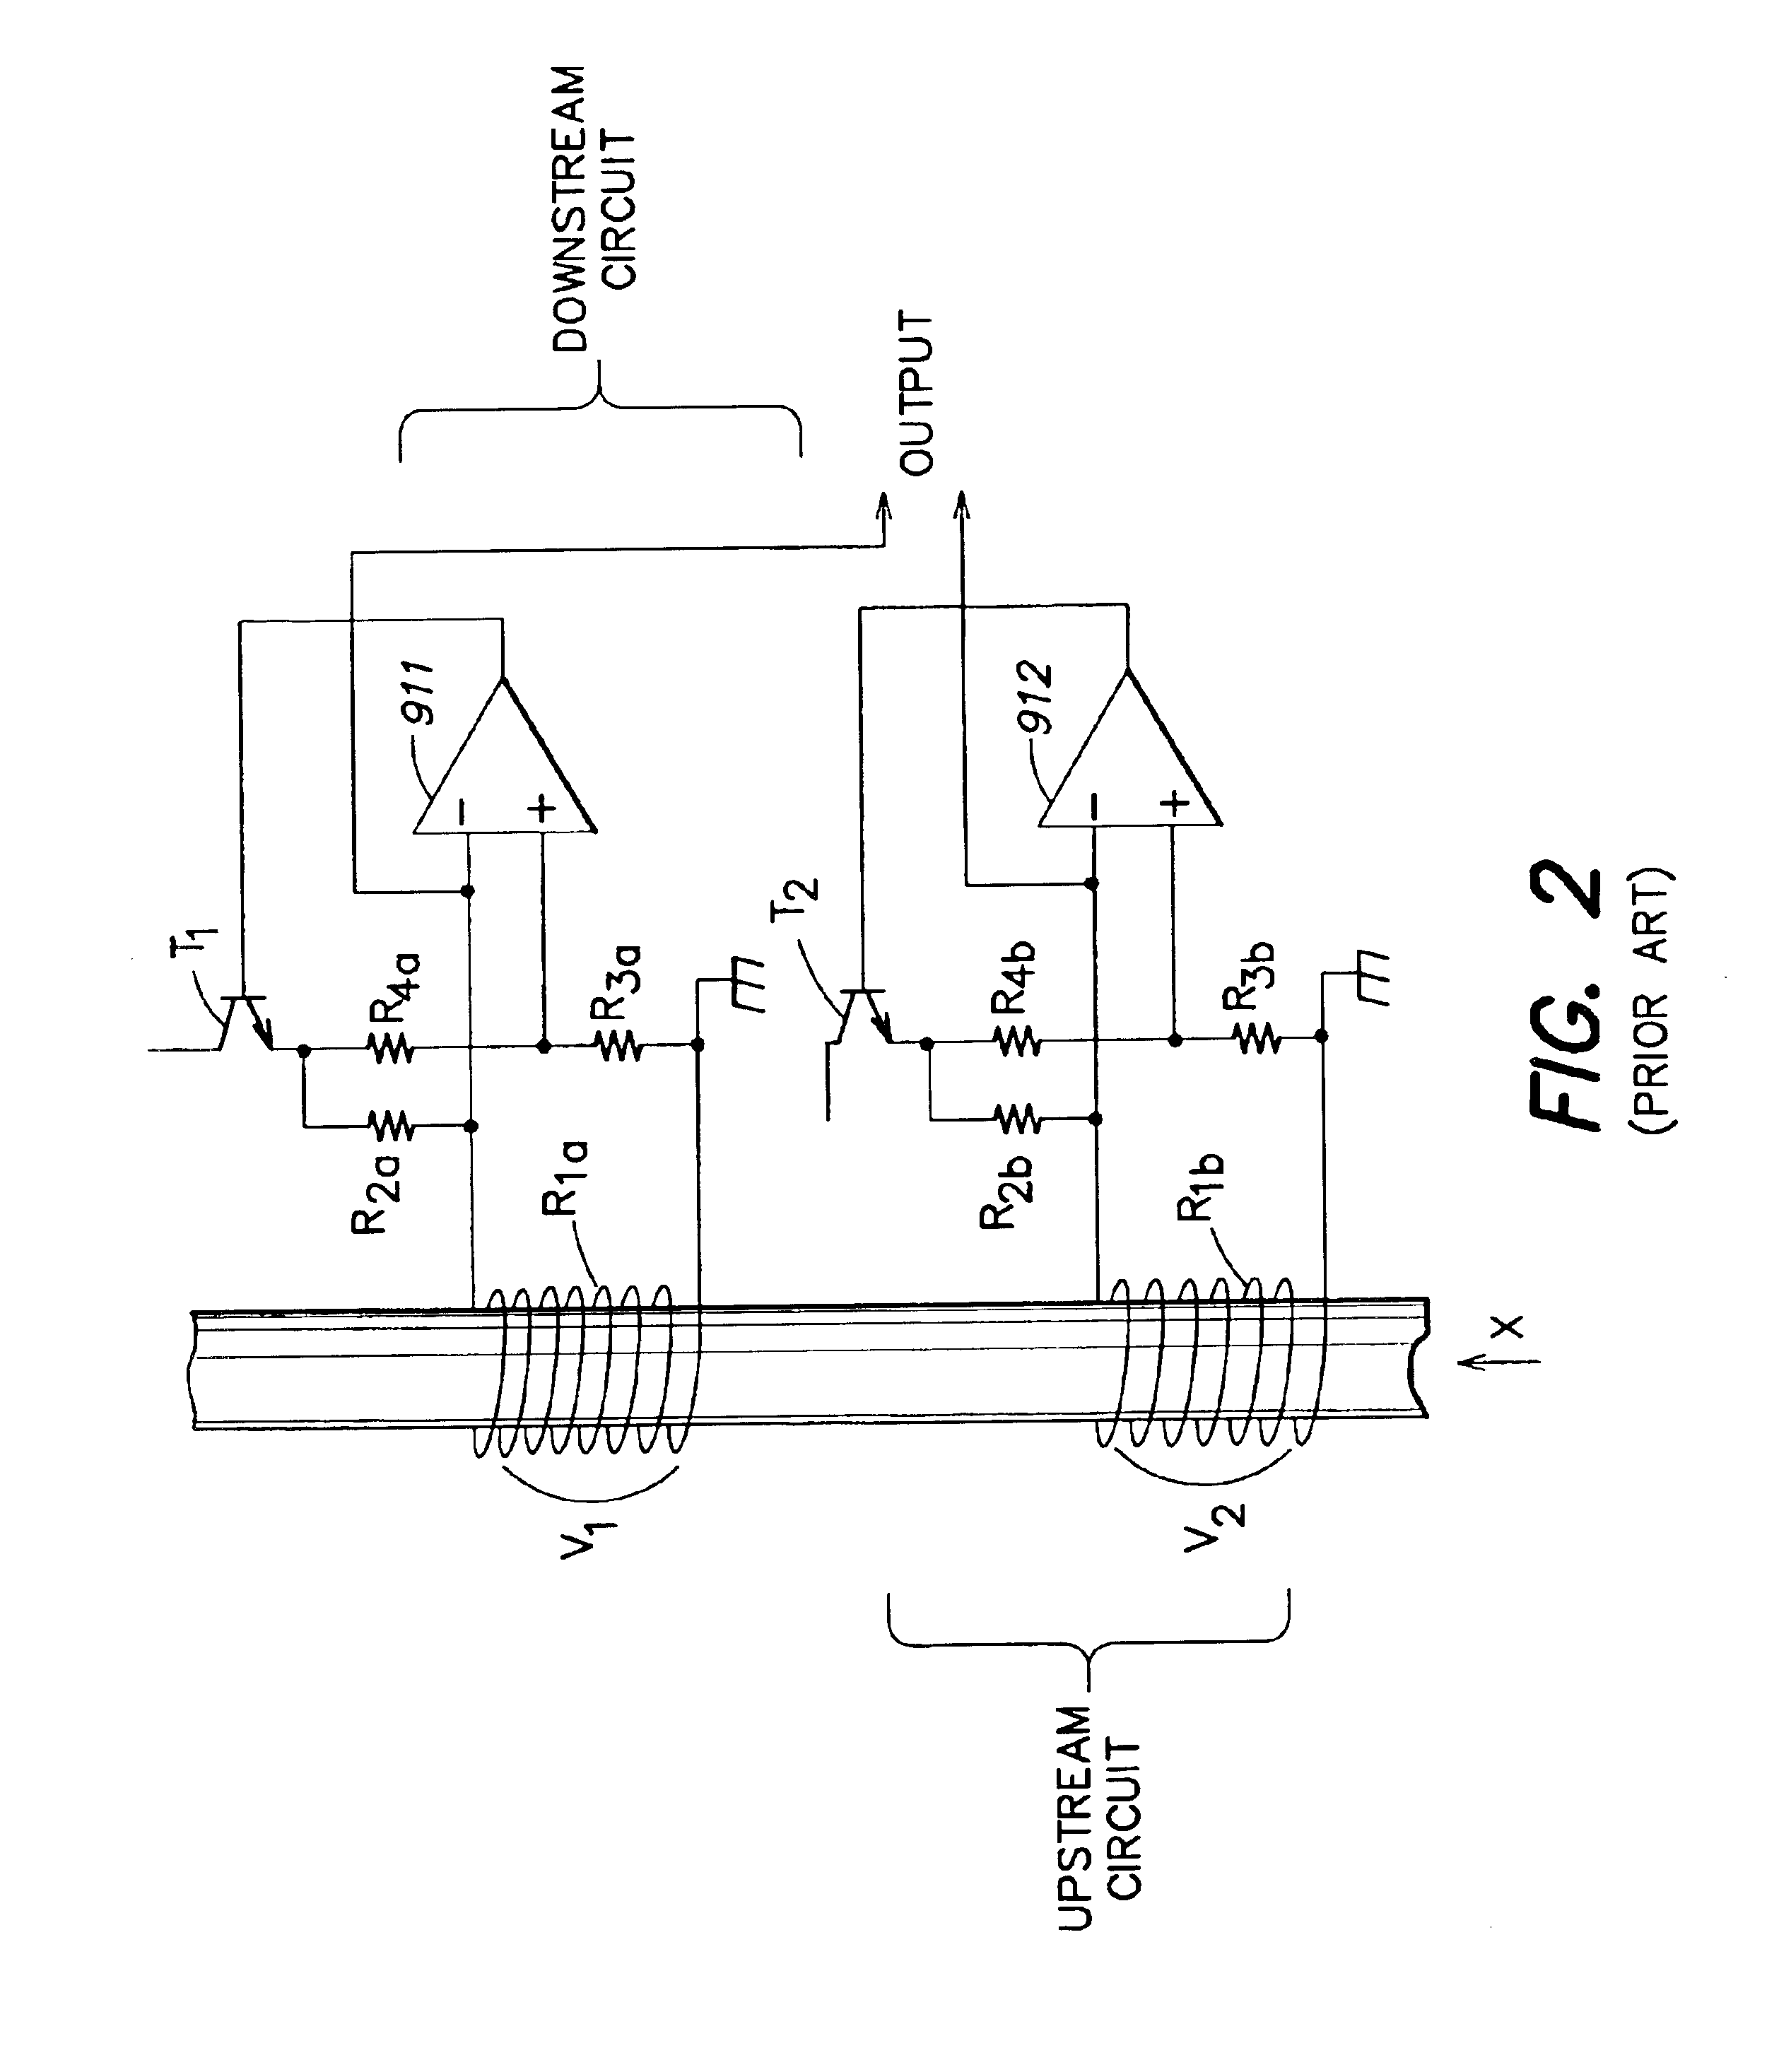 Variable resistance sensor with common reference leg